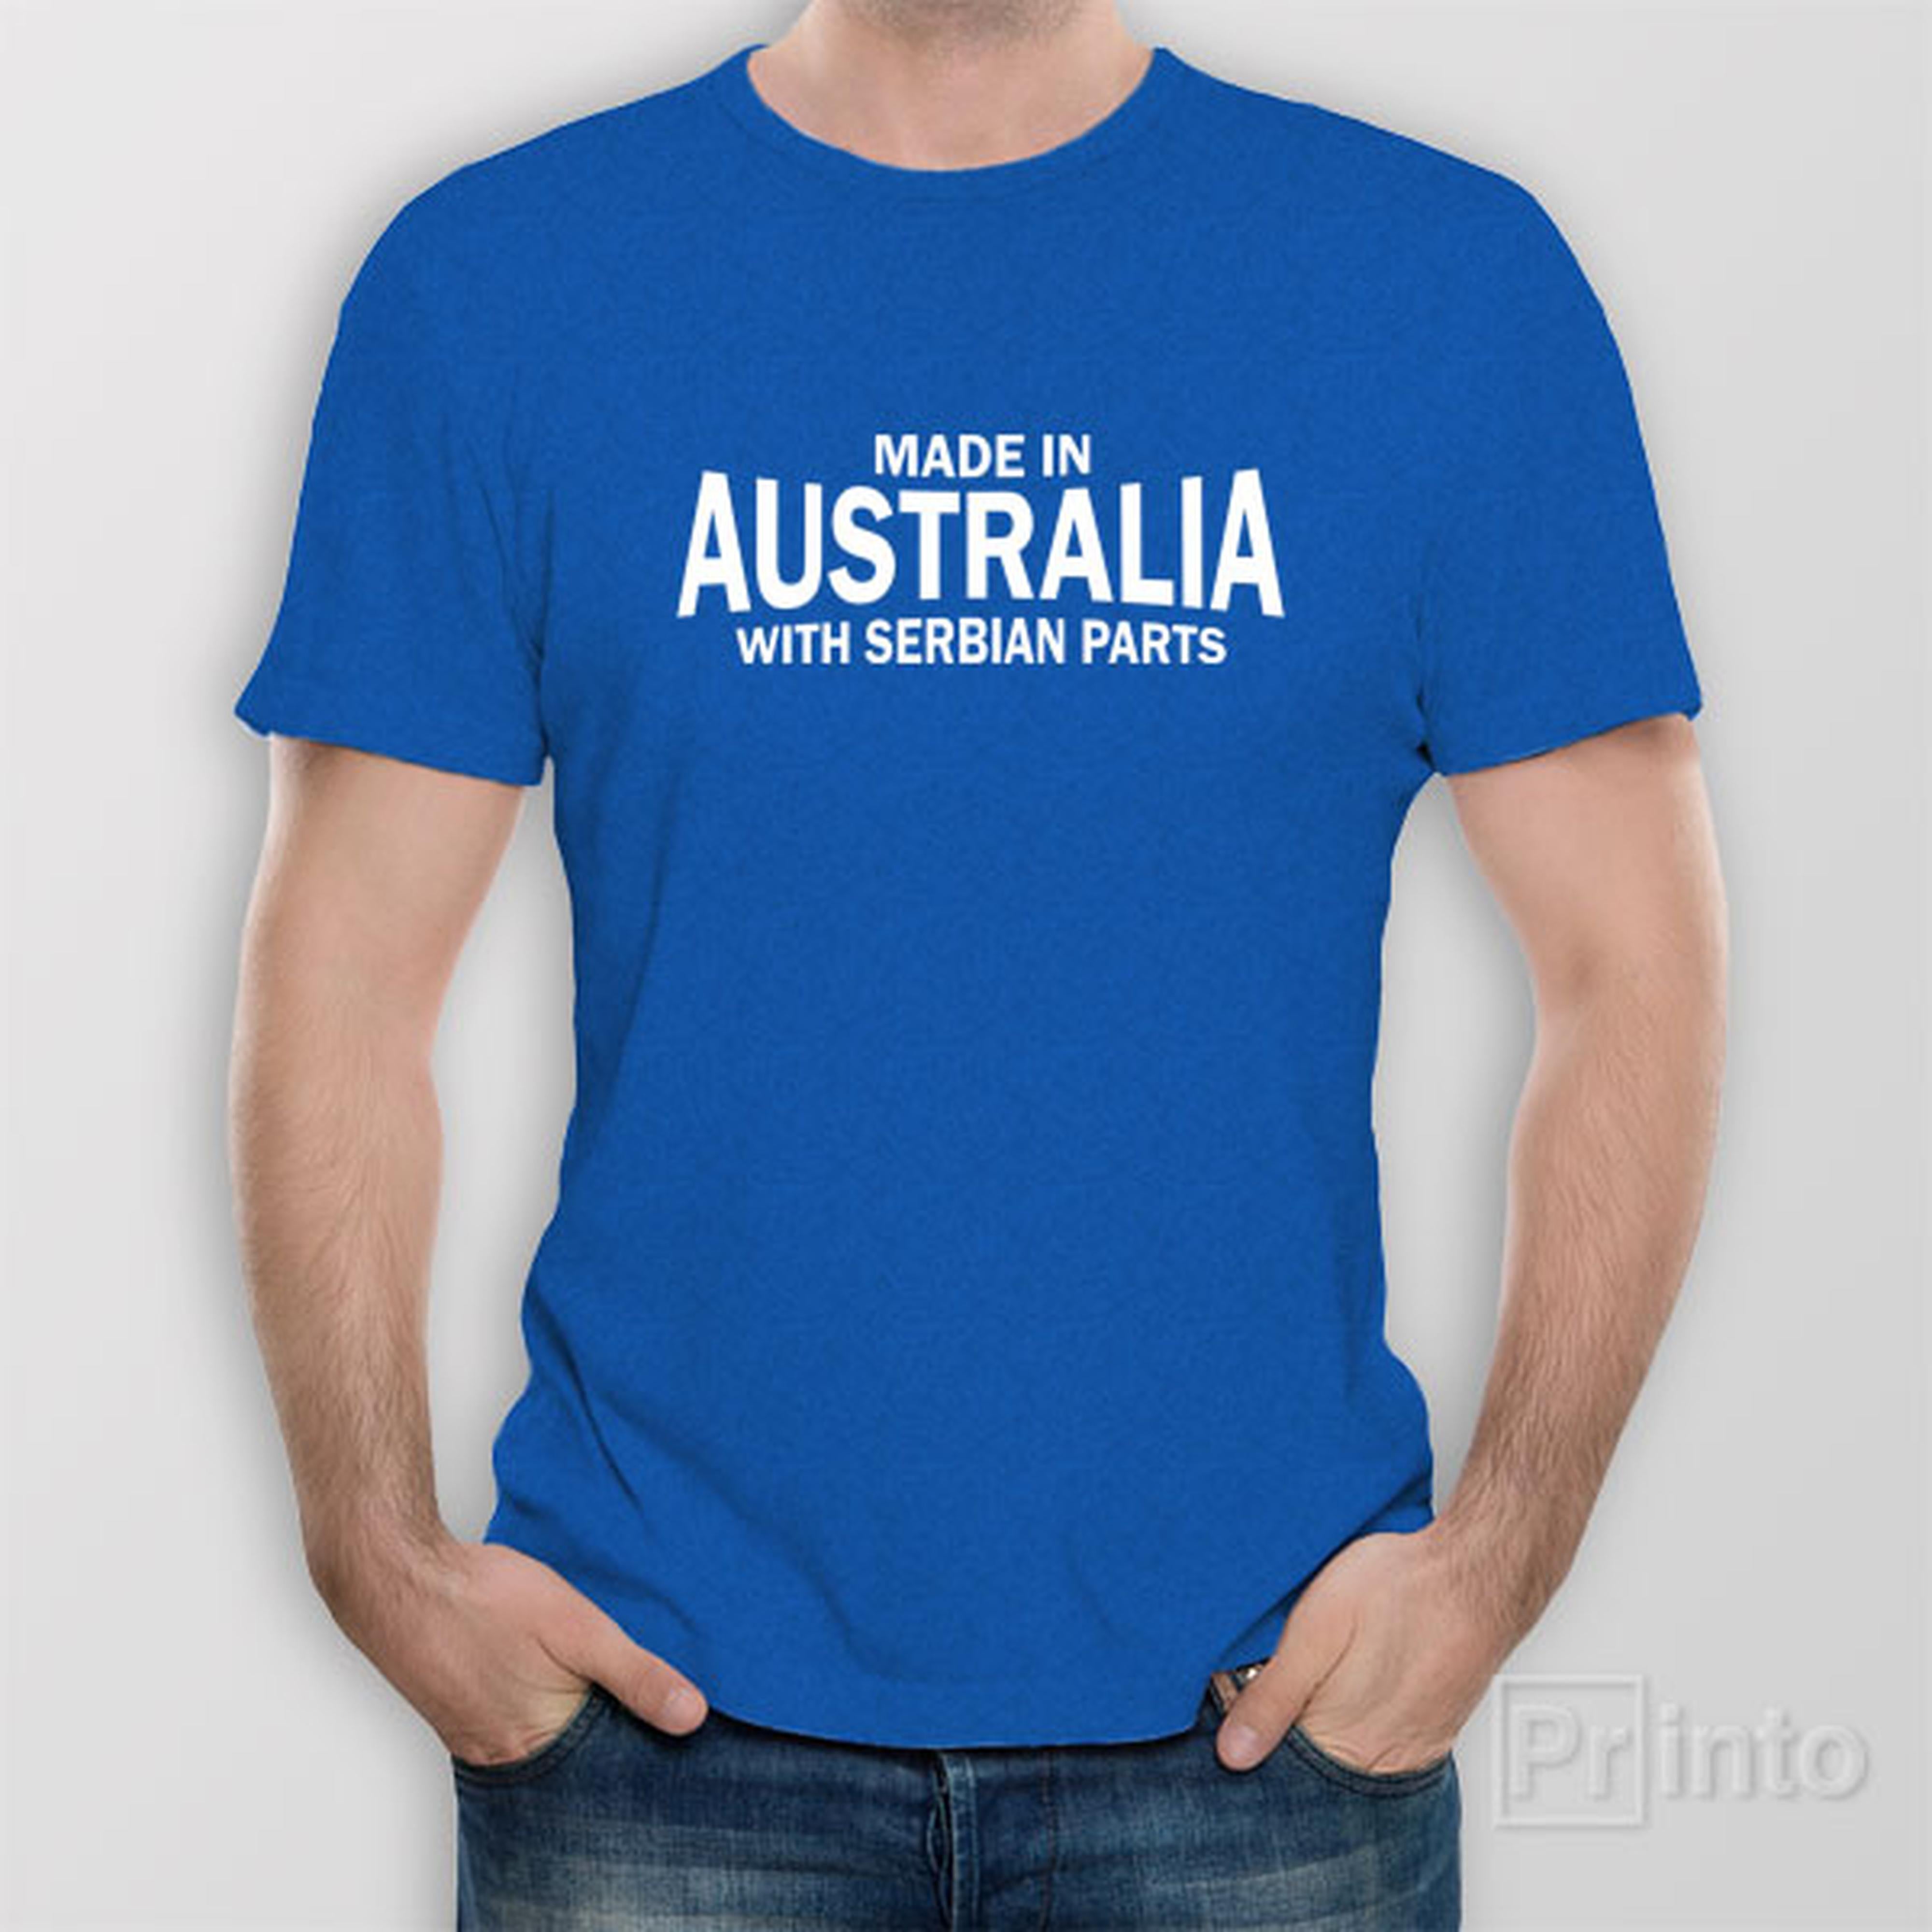 made-in-australia-with-serbian-parts-t-shirt